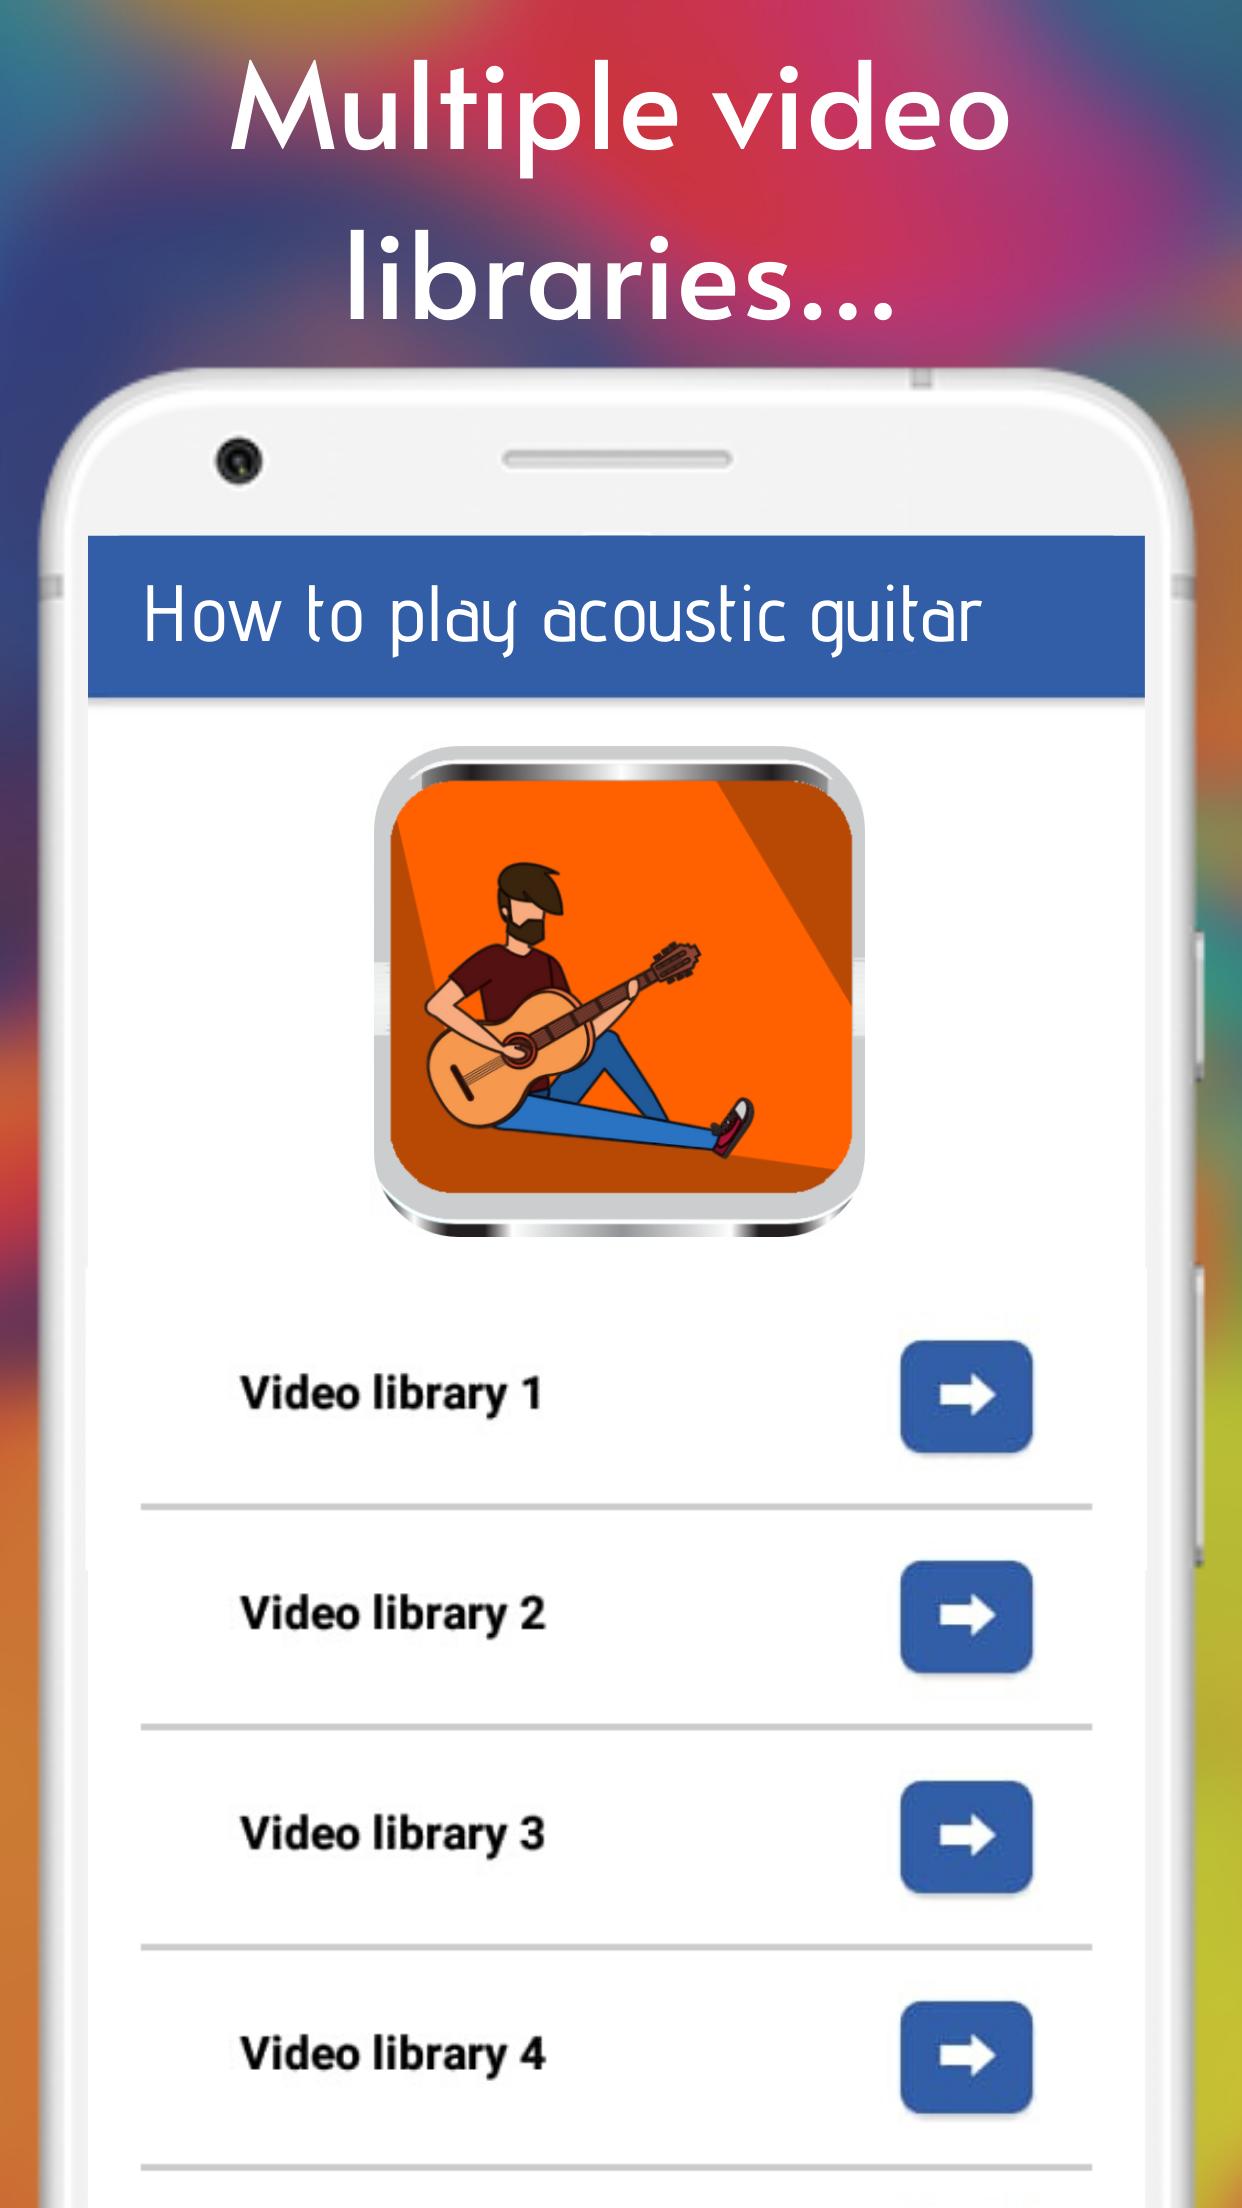 How to play acoustic guitar 5.0 Screenshot 5